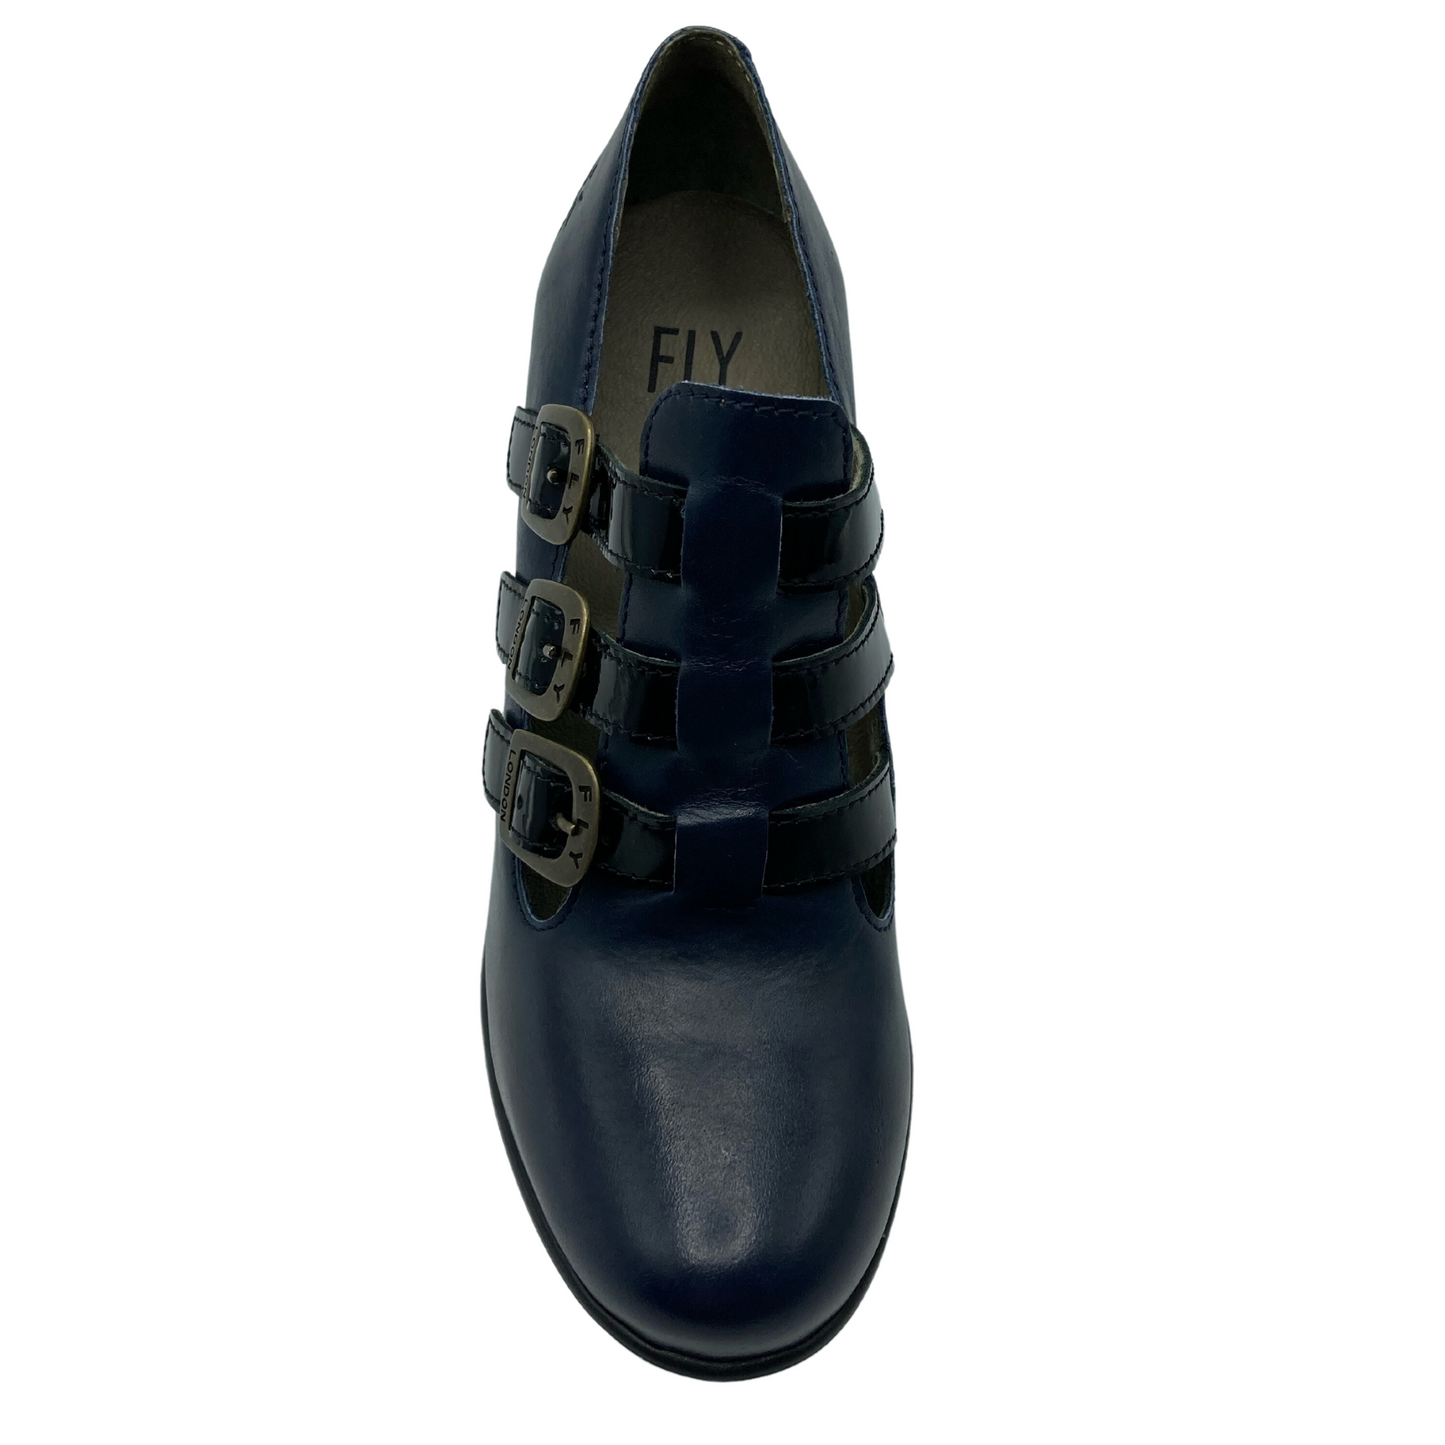 Top view of rounded toe leather shoe with 3 strap detail.